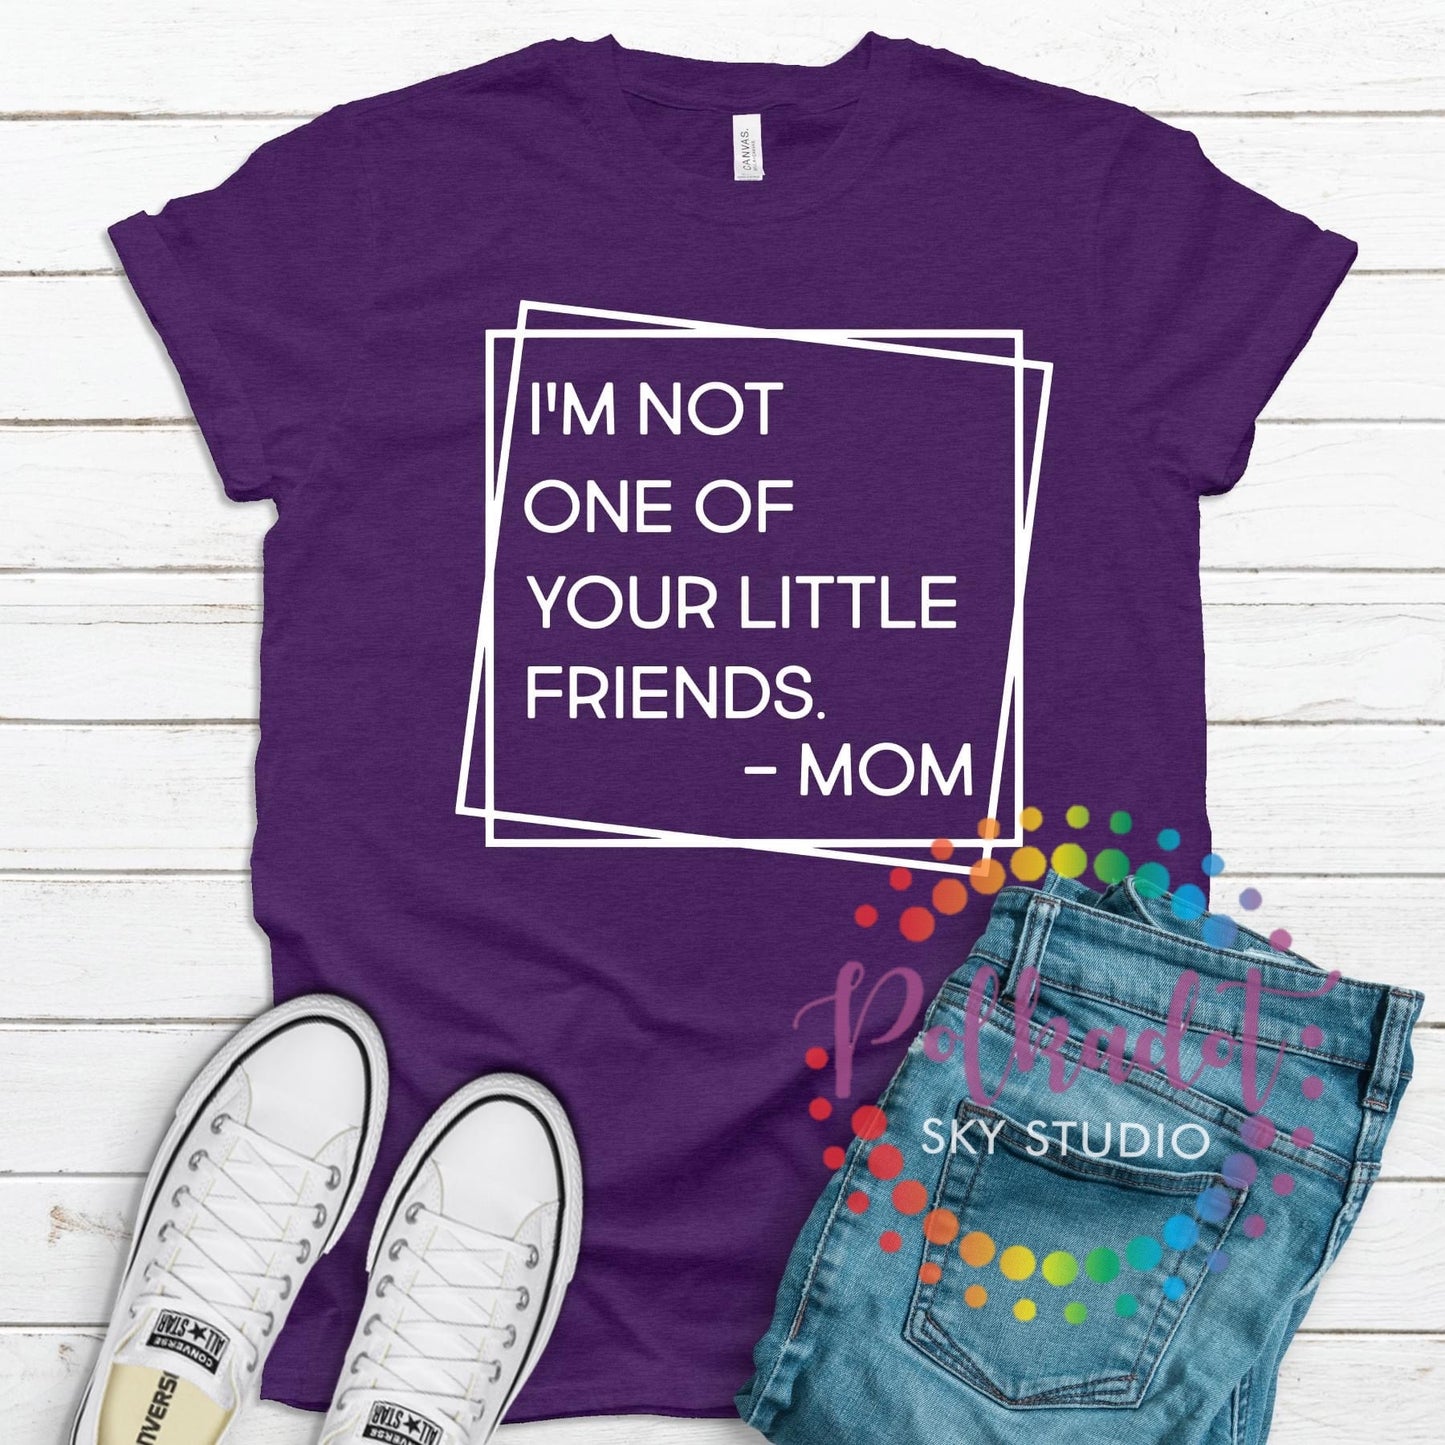 Not Your Friend-Mom